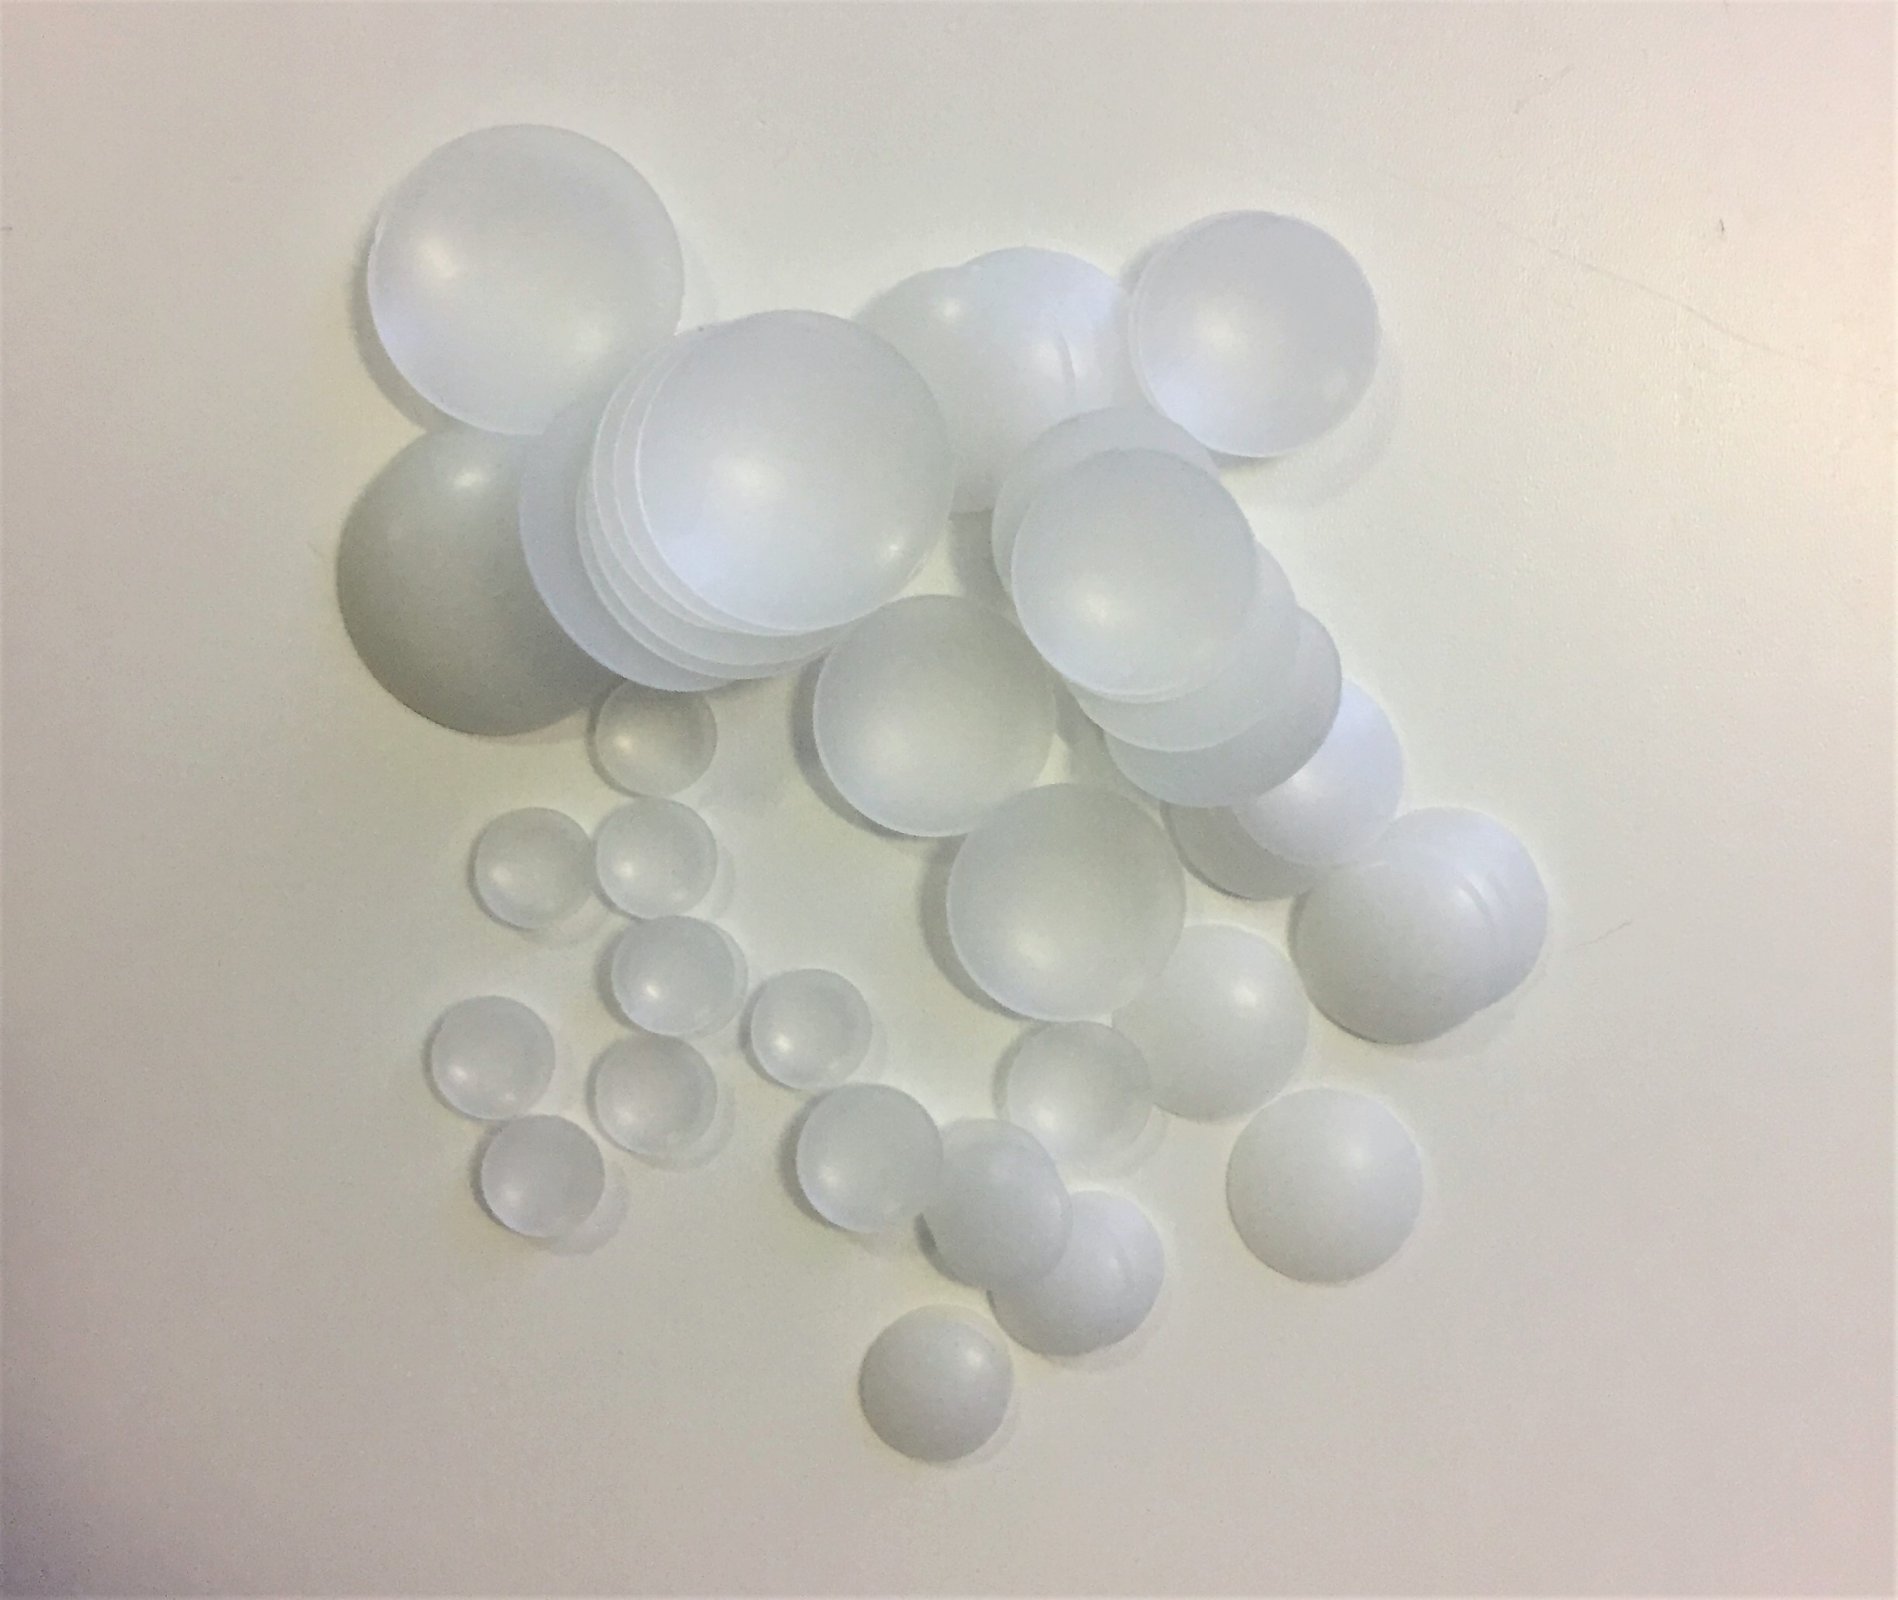 Plastic Domes - Mixed Sizes - Coast & Country